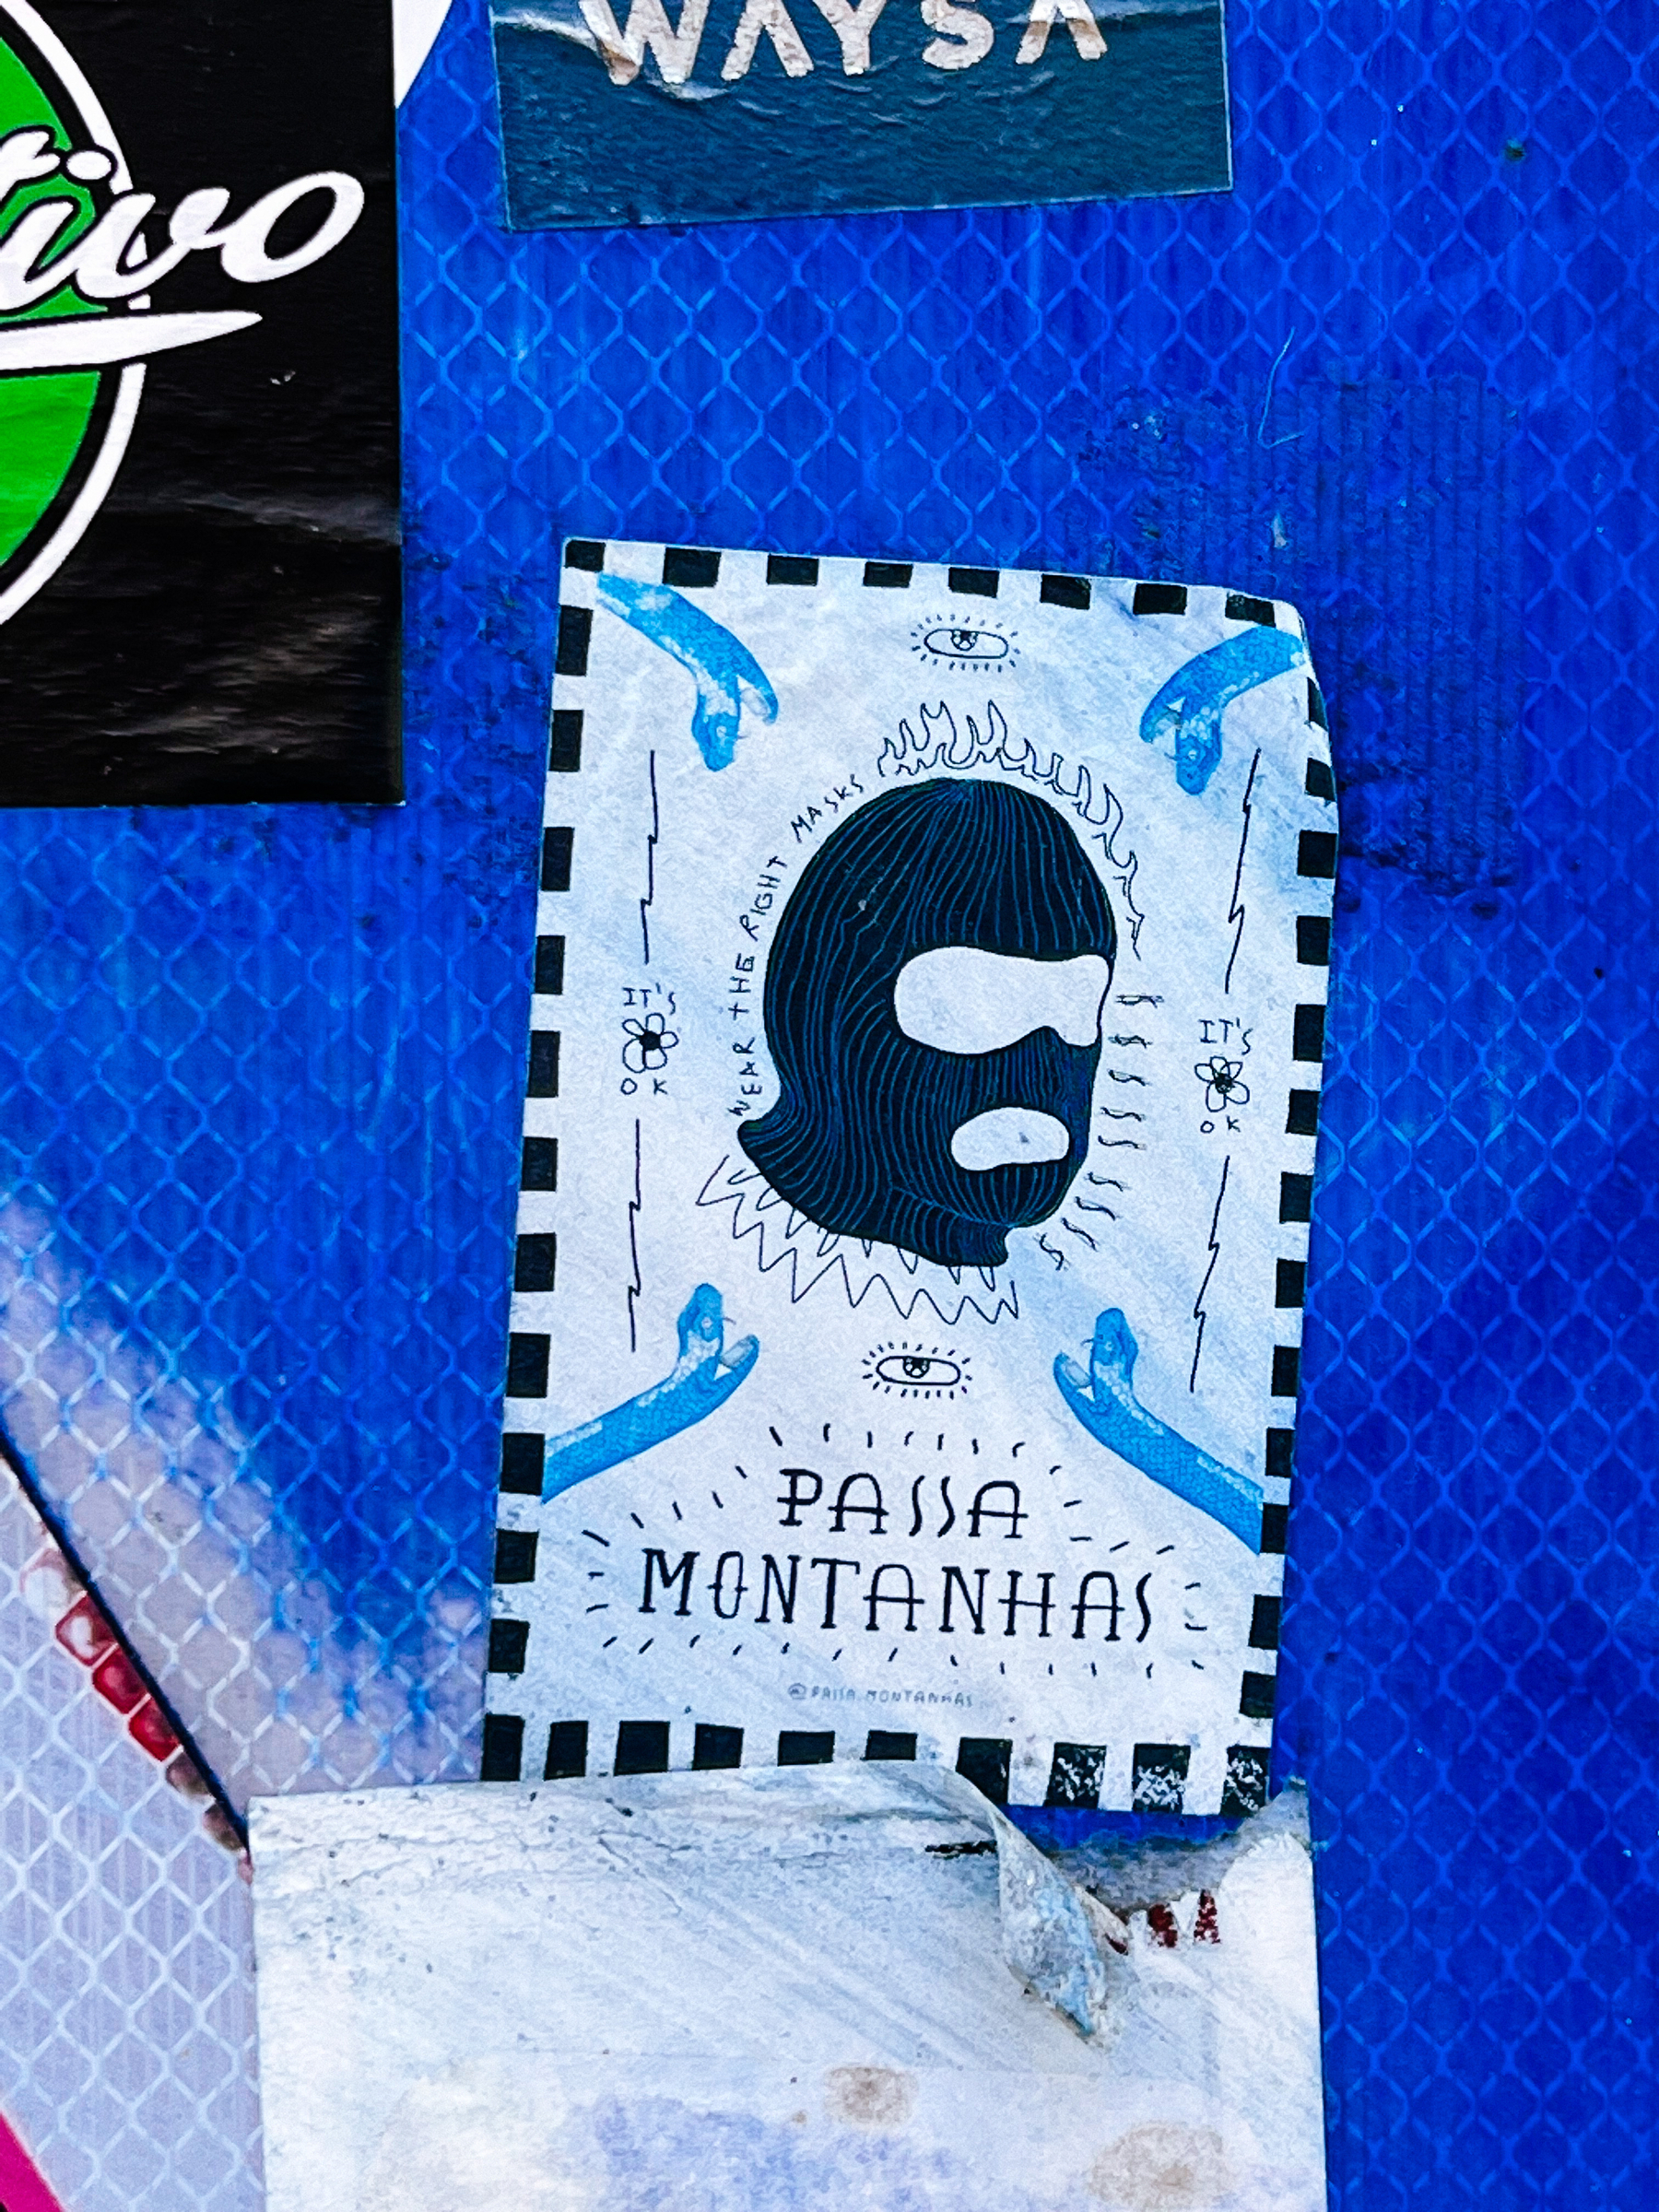 Sticker with a balaclava, and the words “wear the right masks”, along with “passa montanha”, the Portuguese words for balaclava. 